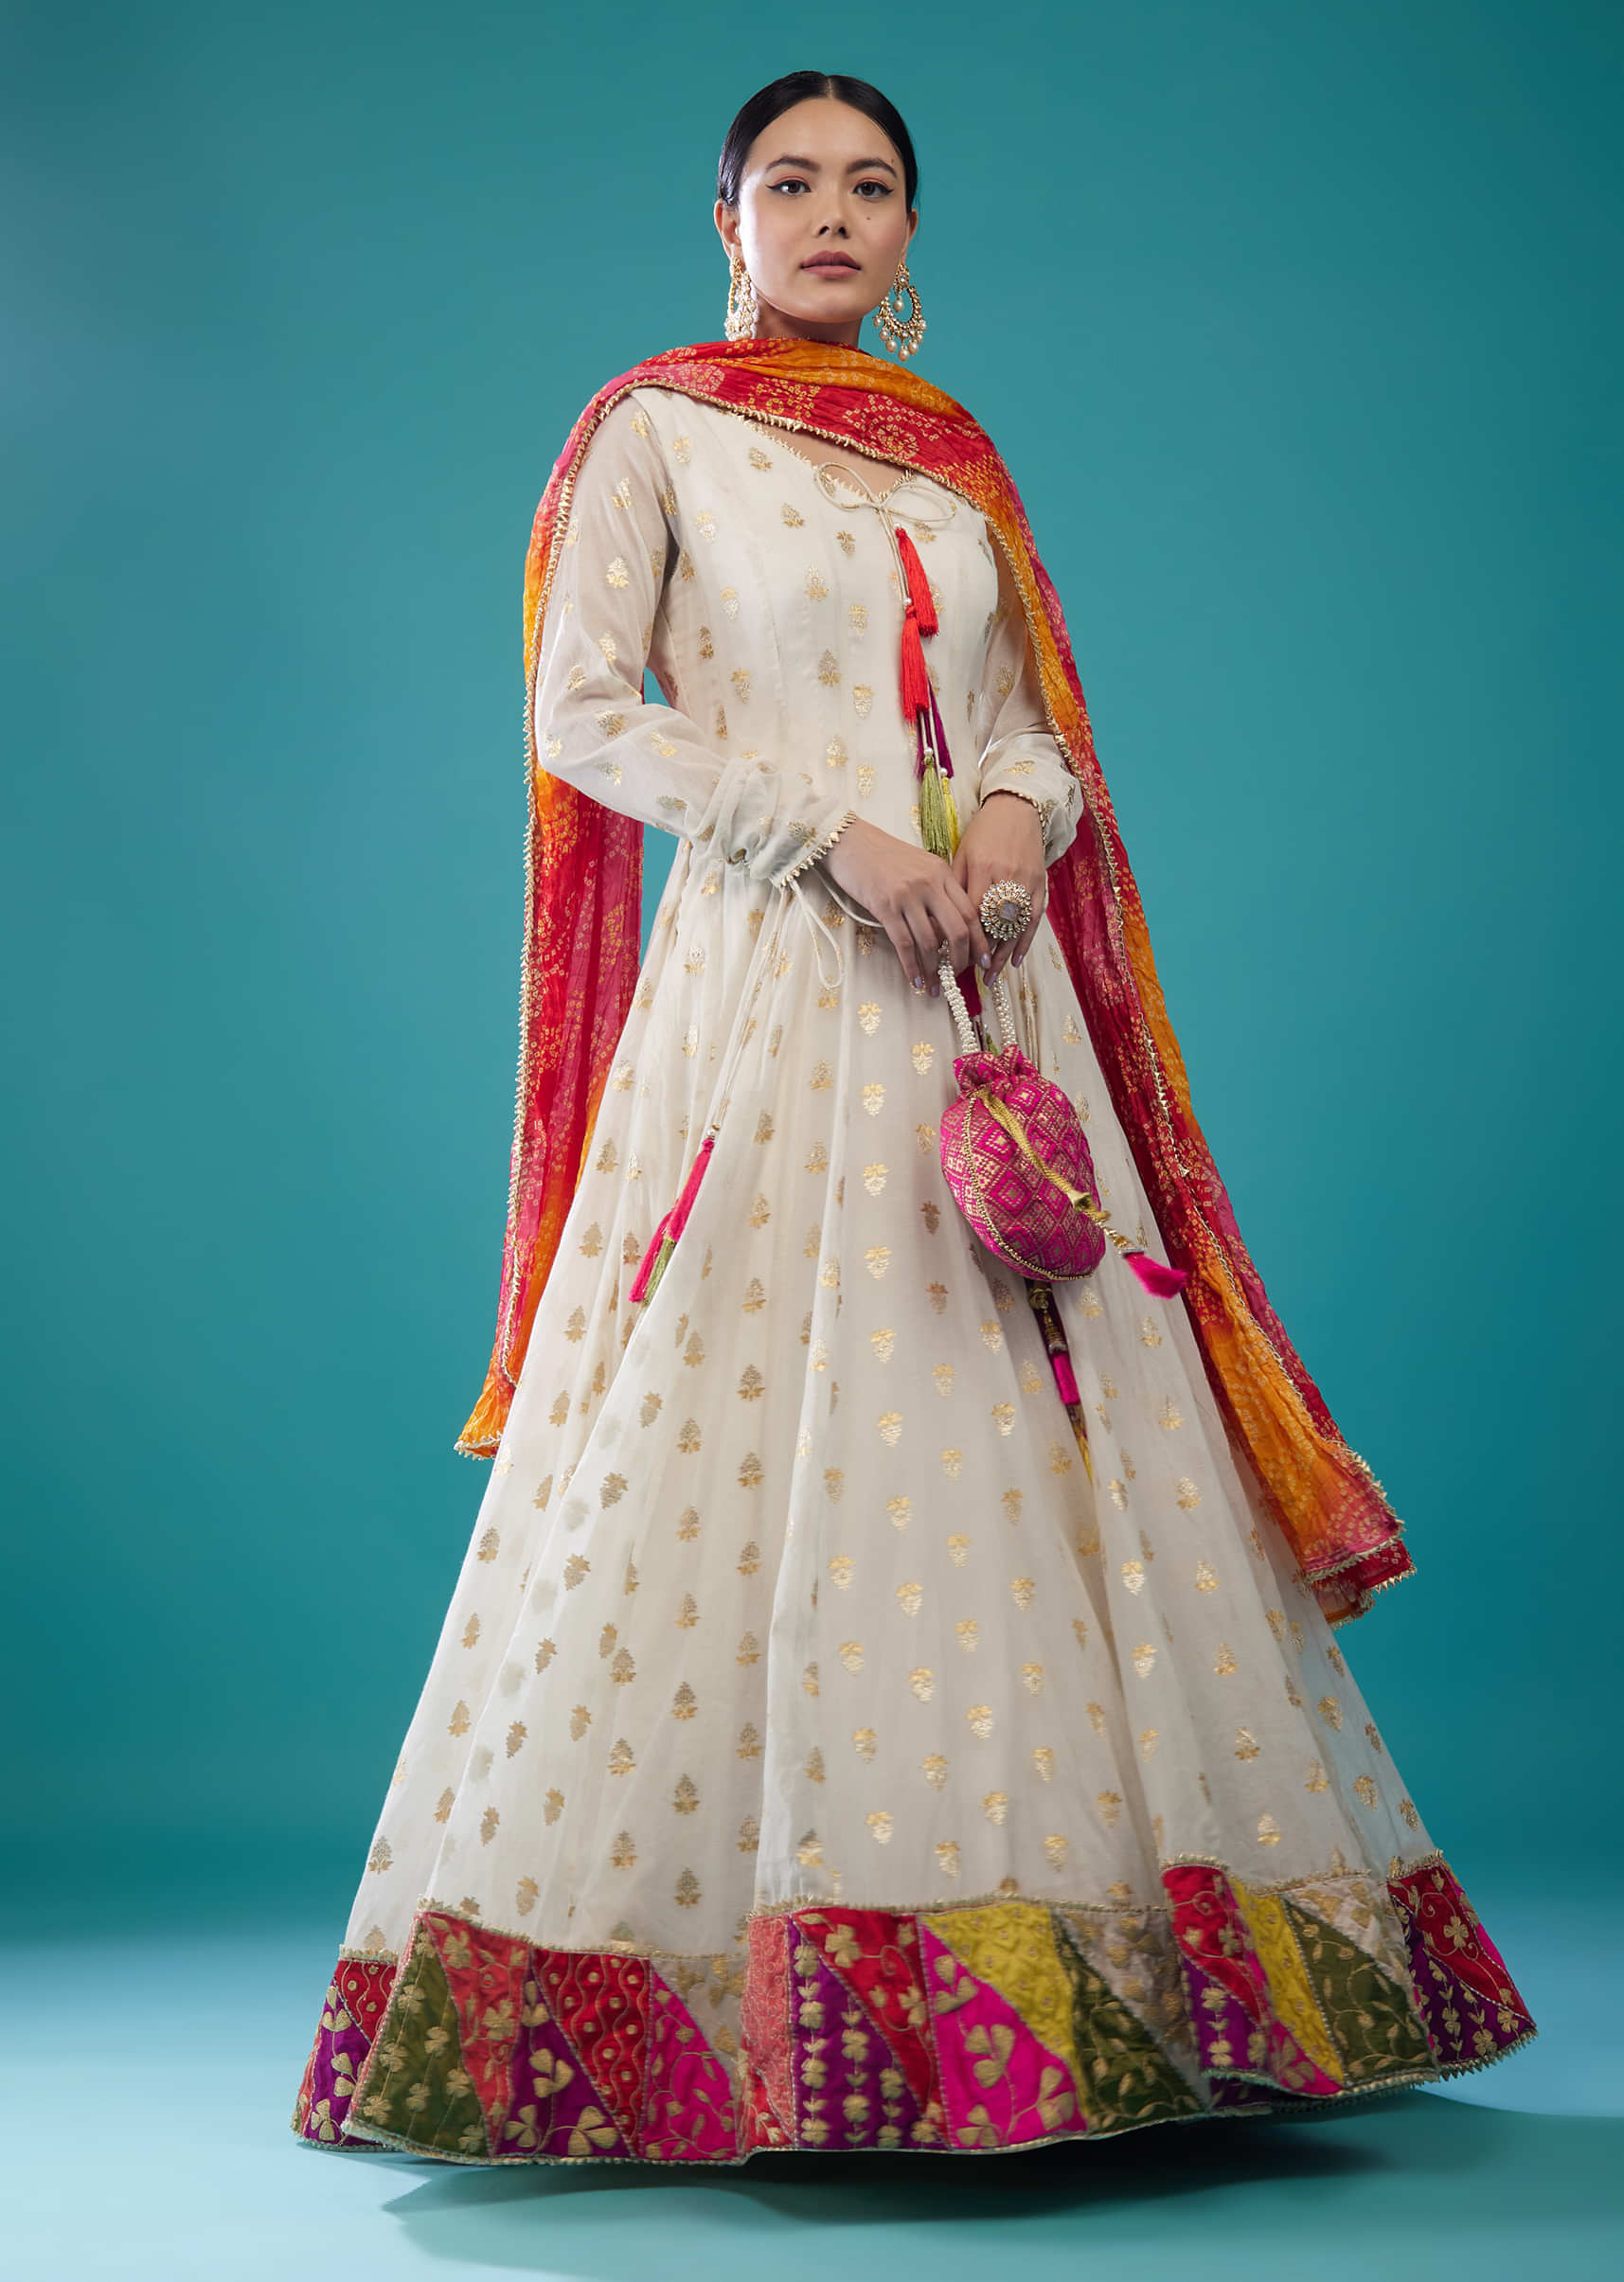 Pearl White Embroidered Chanderi Anarkali Suit With Bandhani Dupatta